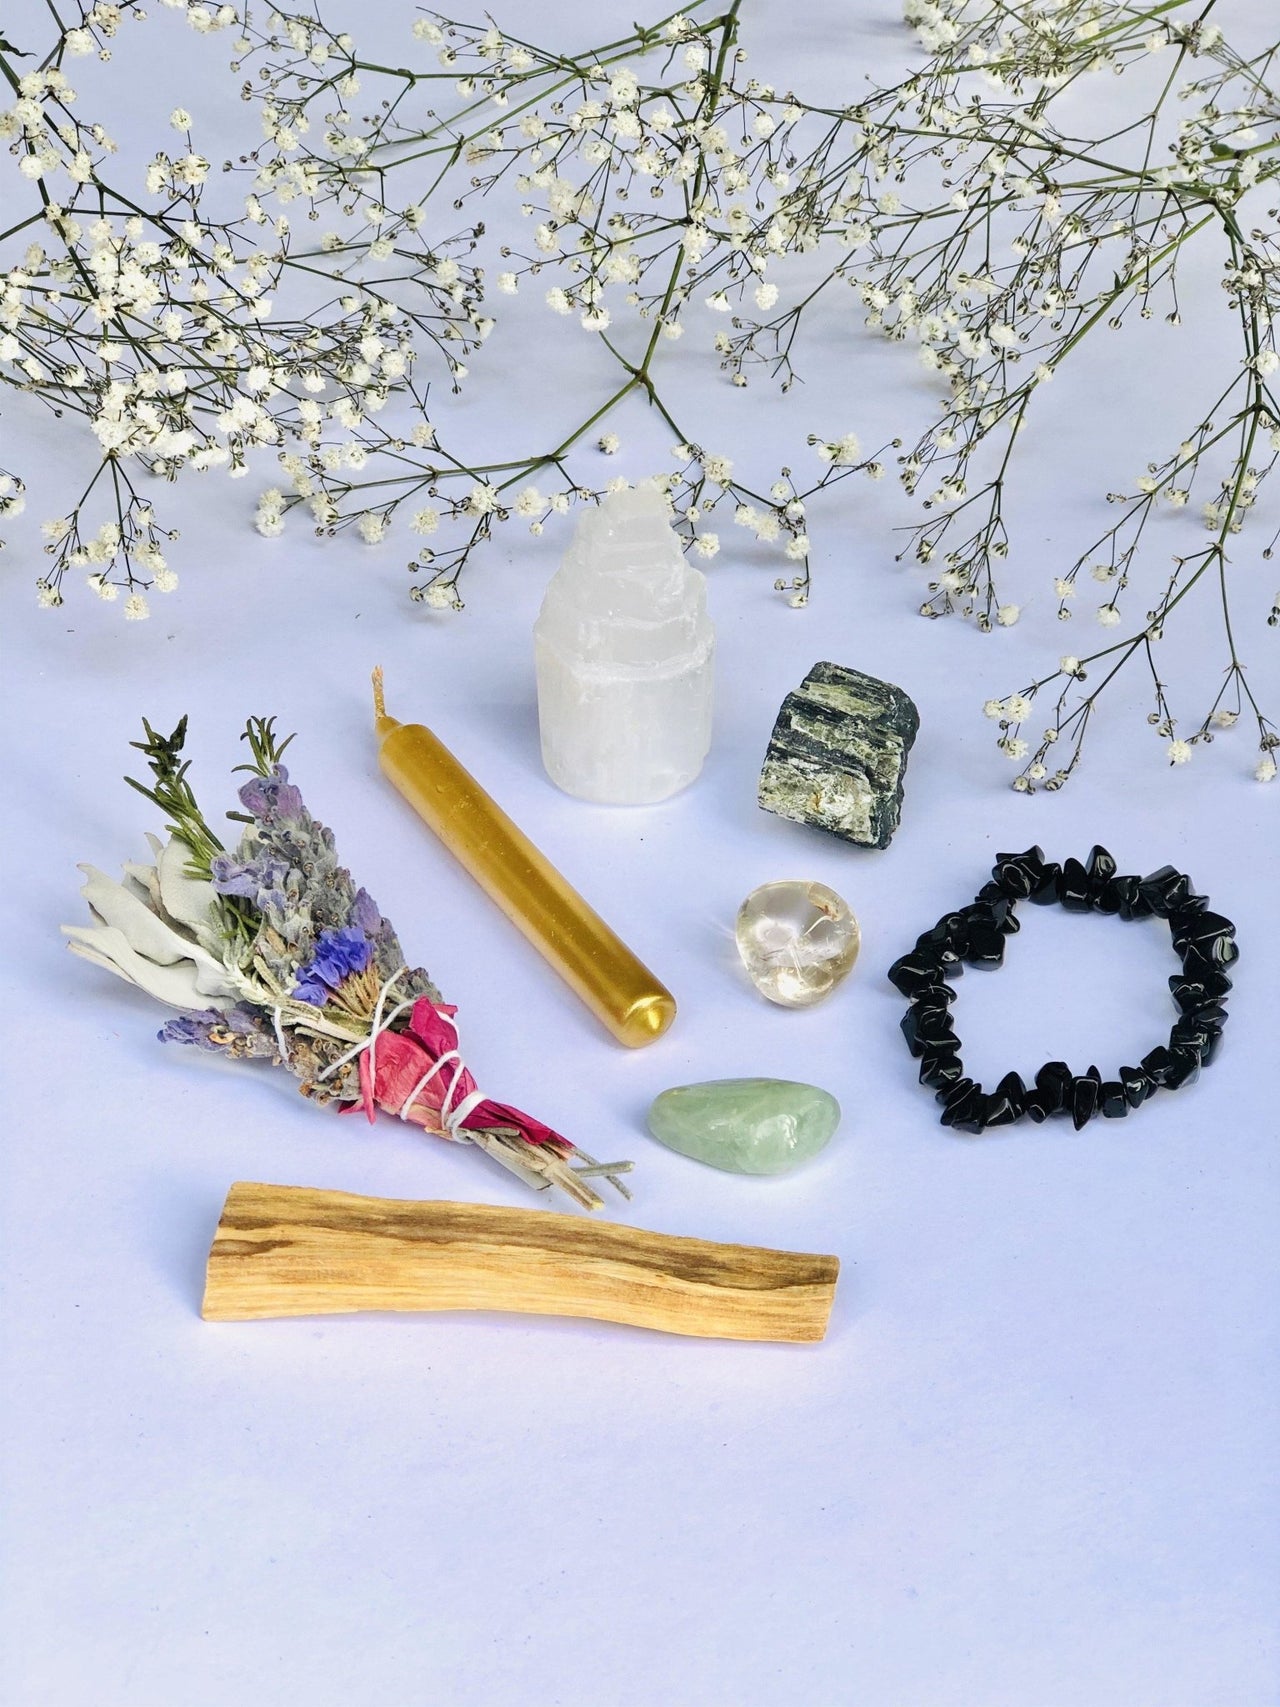 Protection & Grounding Wellbeing Kit - Sentient Creations